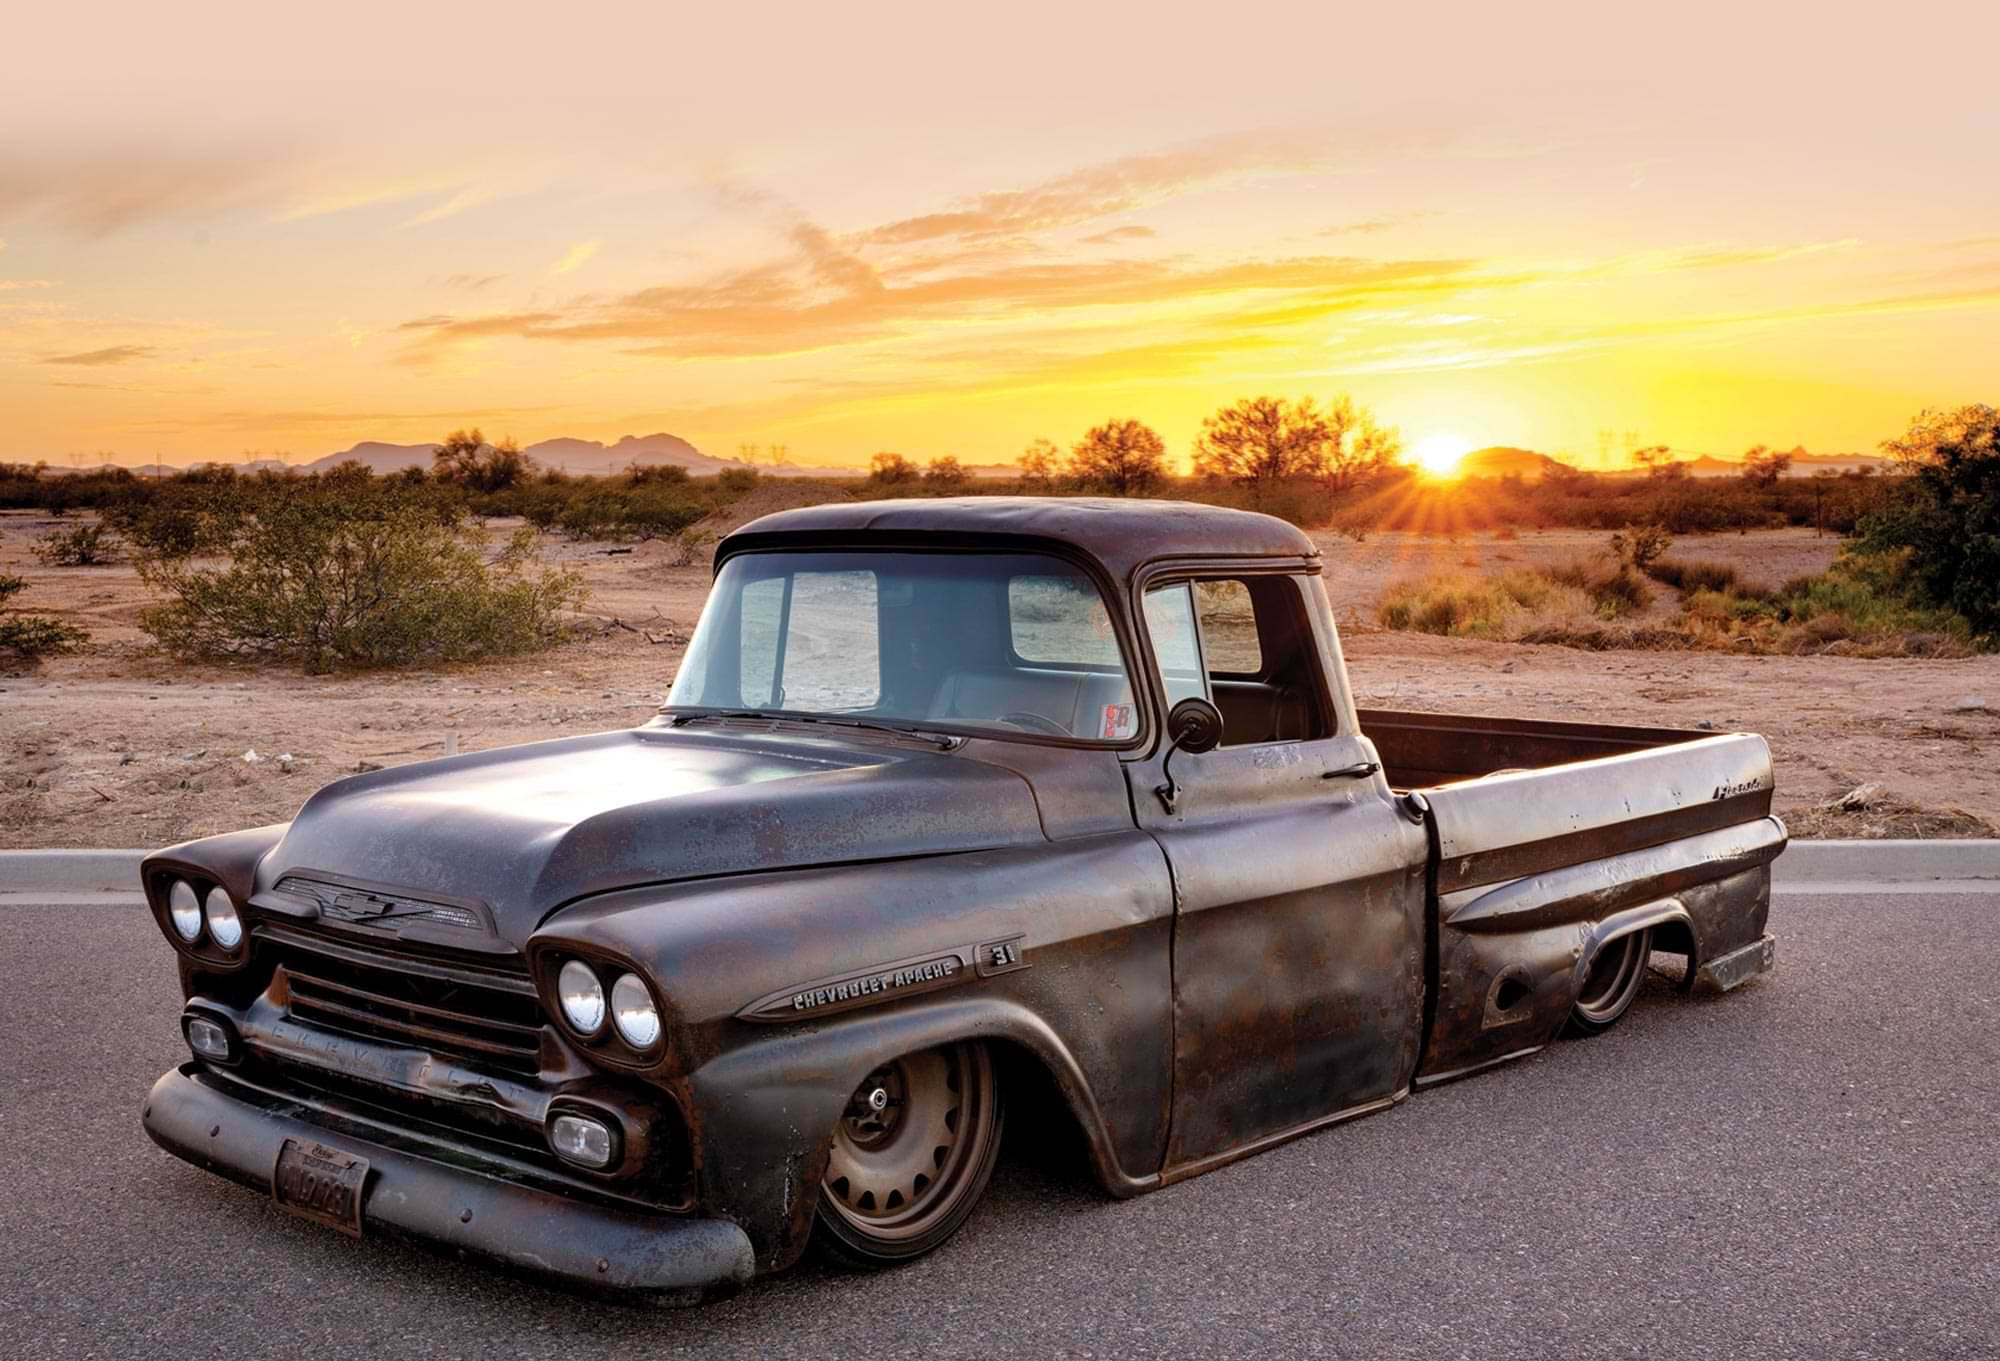 three quarter view of a '59 Apache with a dark patina finish, parked on a desert highway at sunset